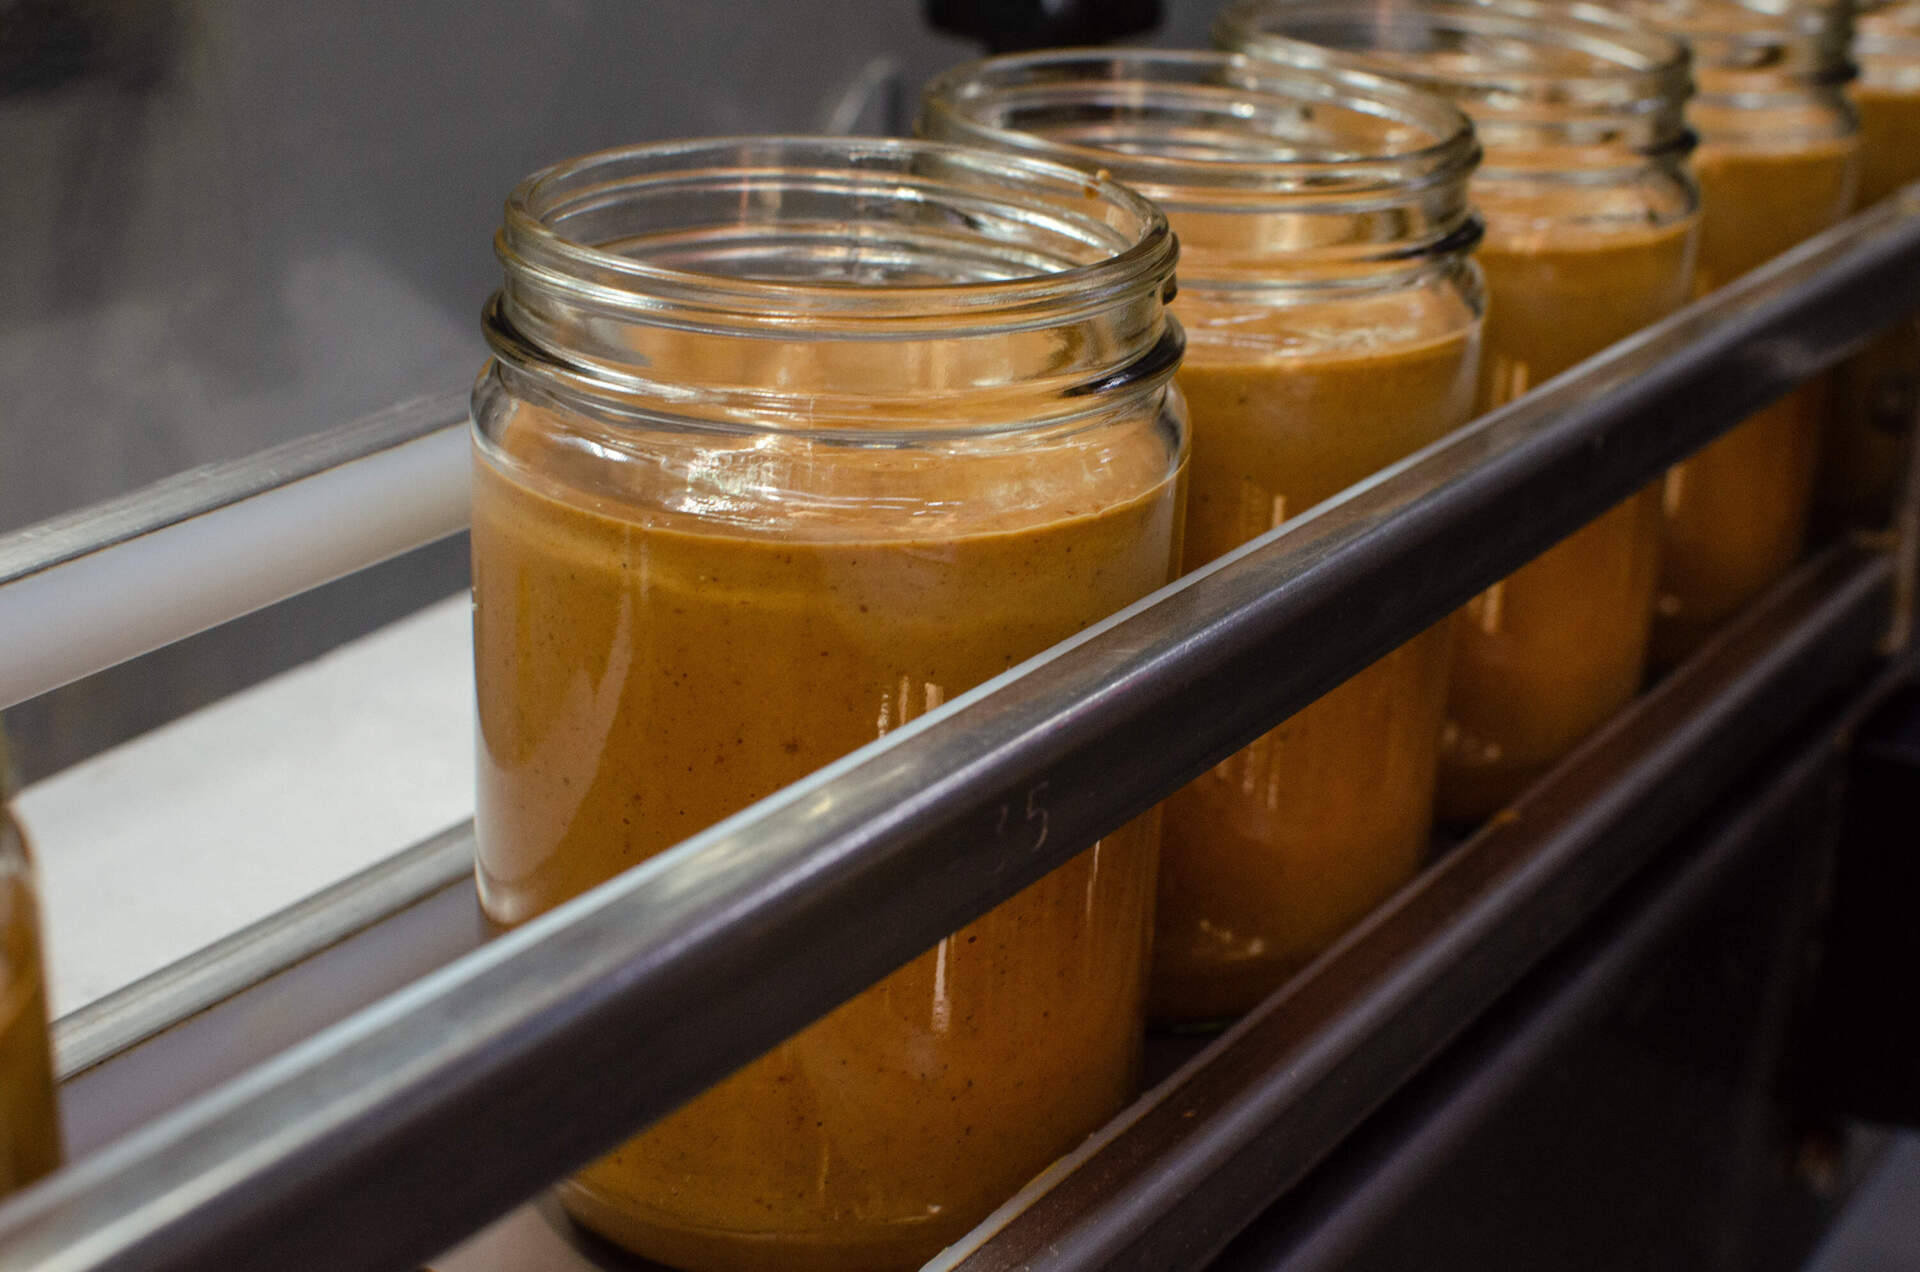 Teddie natural smooth peanut butter in jars awaiting lids and labels. (Sharon Brody/WBUR)